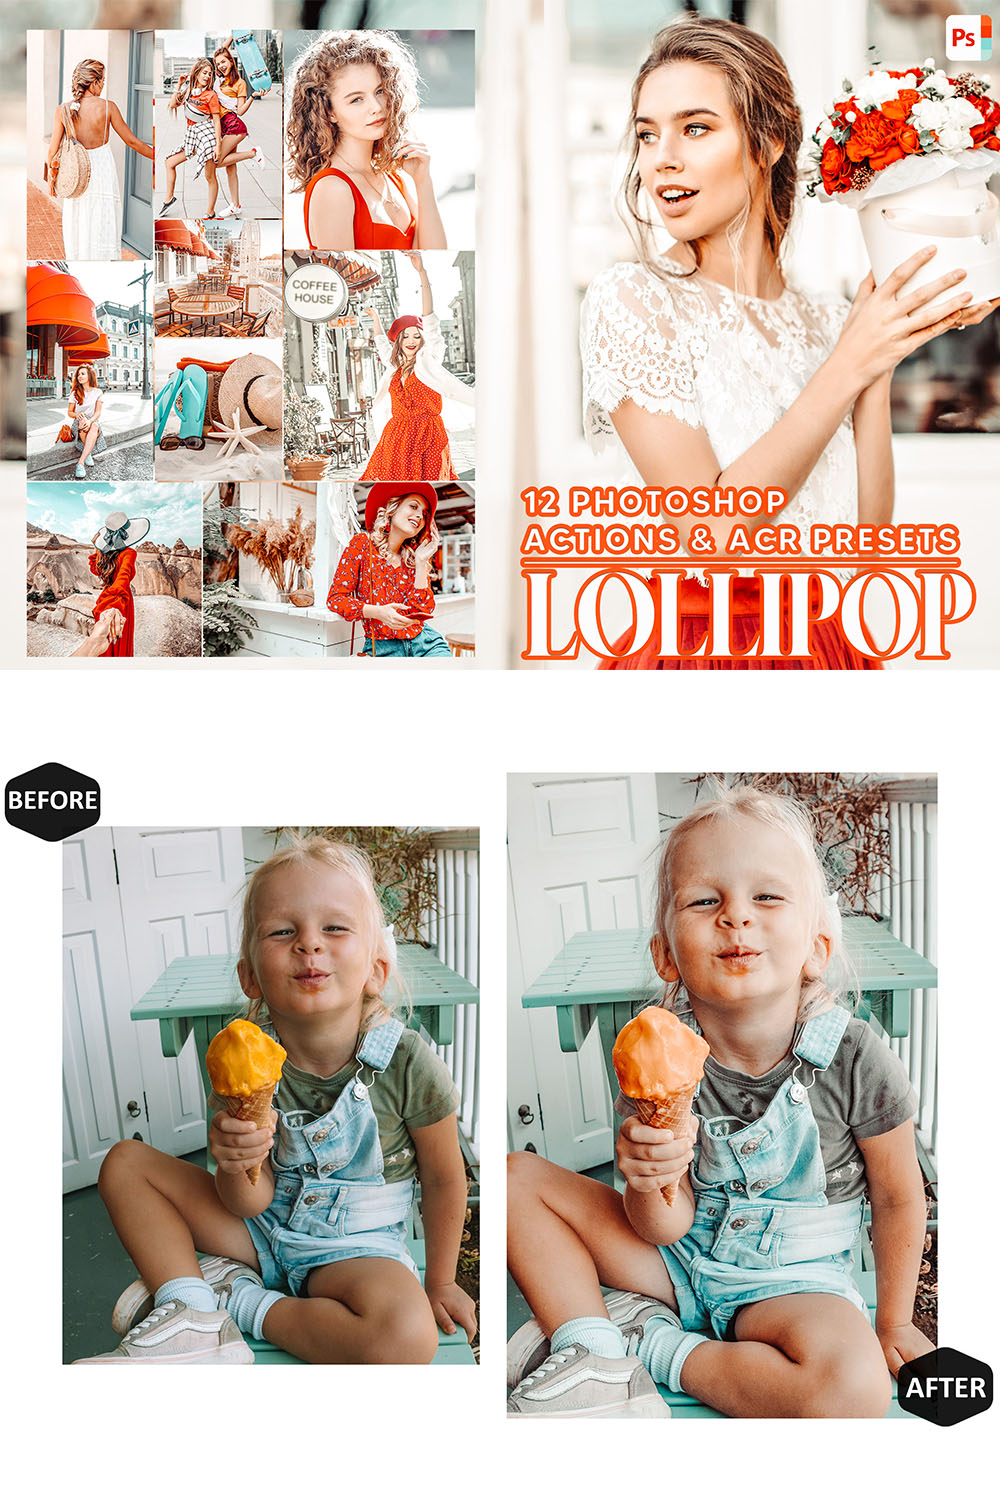 12 Photoshop Actions, Lollipop Ps Action, Bright Summer ACR Preset, Travel Ps Filter, Atn Portrait And Lifestyle Theme For Instagram, Blogger pinterest preview image.